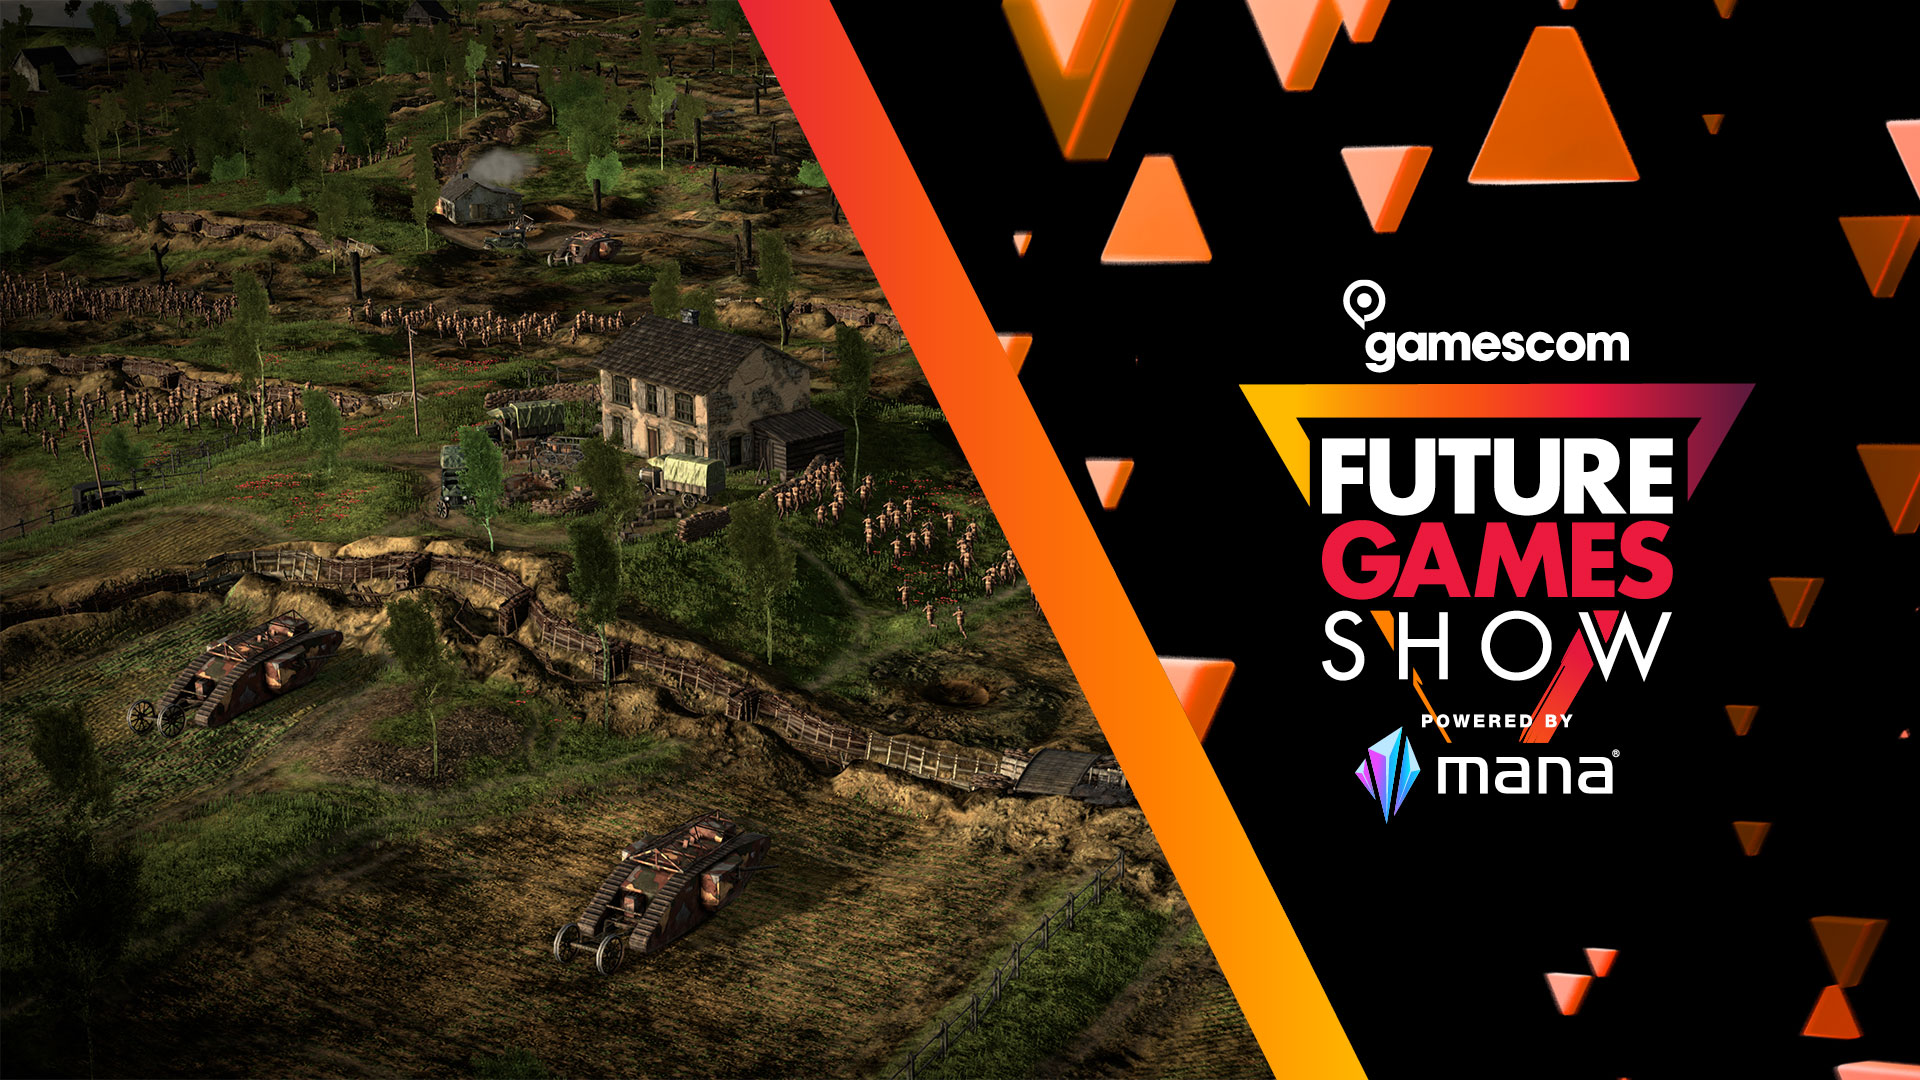 The Great War featuring at the Future Games Show at Gamescom 2022